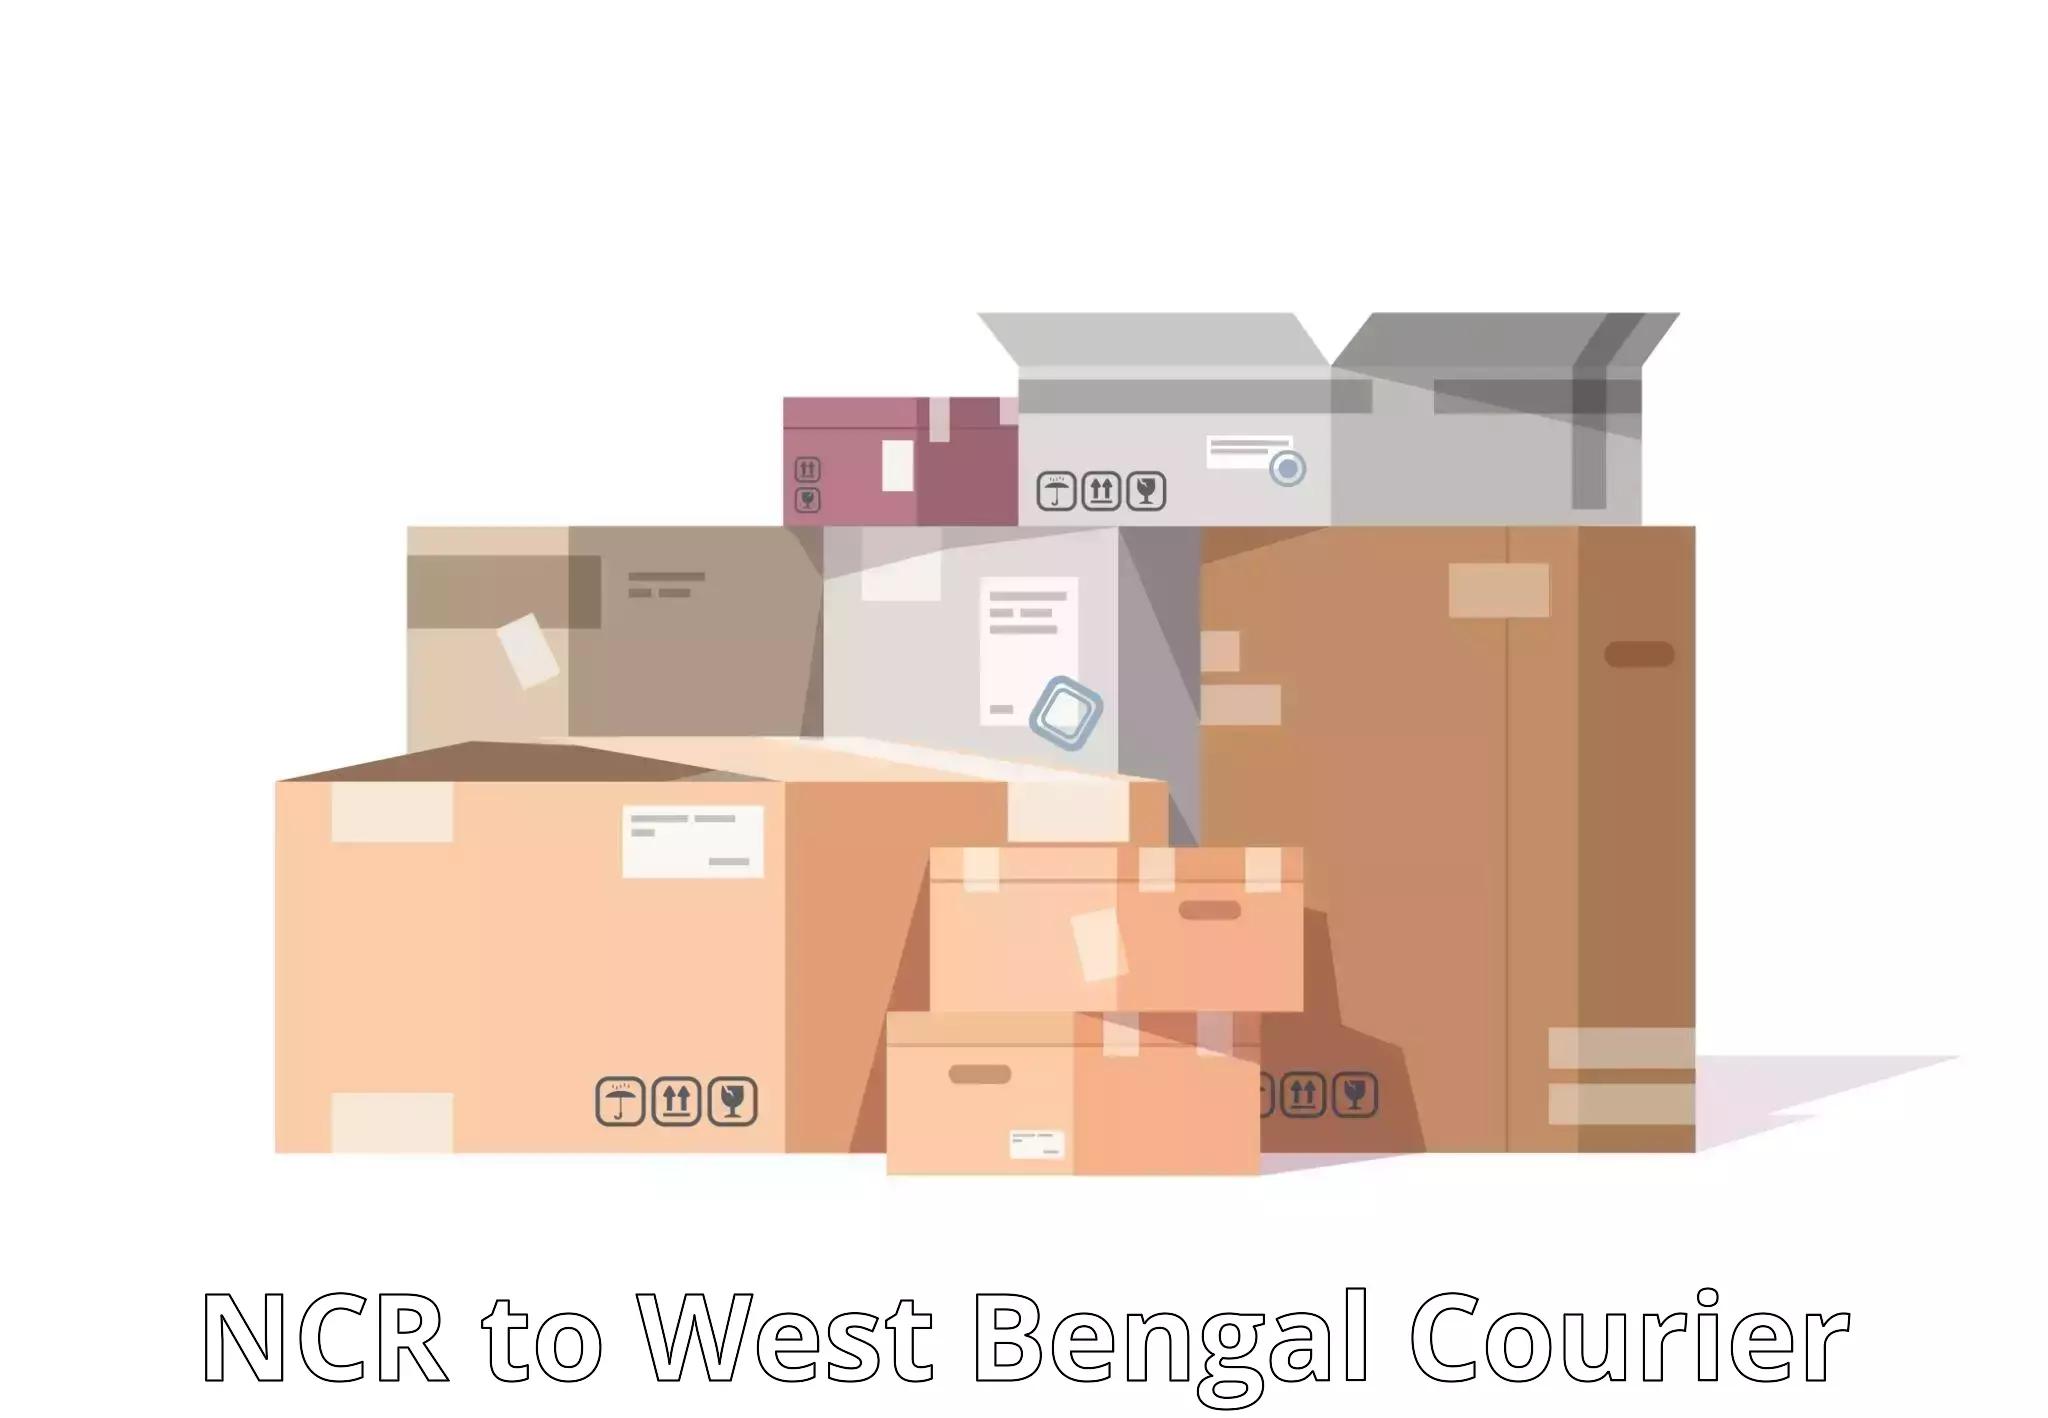 Package delivery network NCR to West Bengal